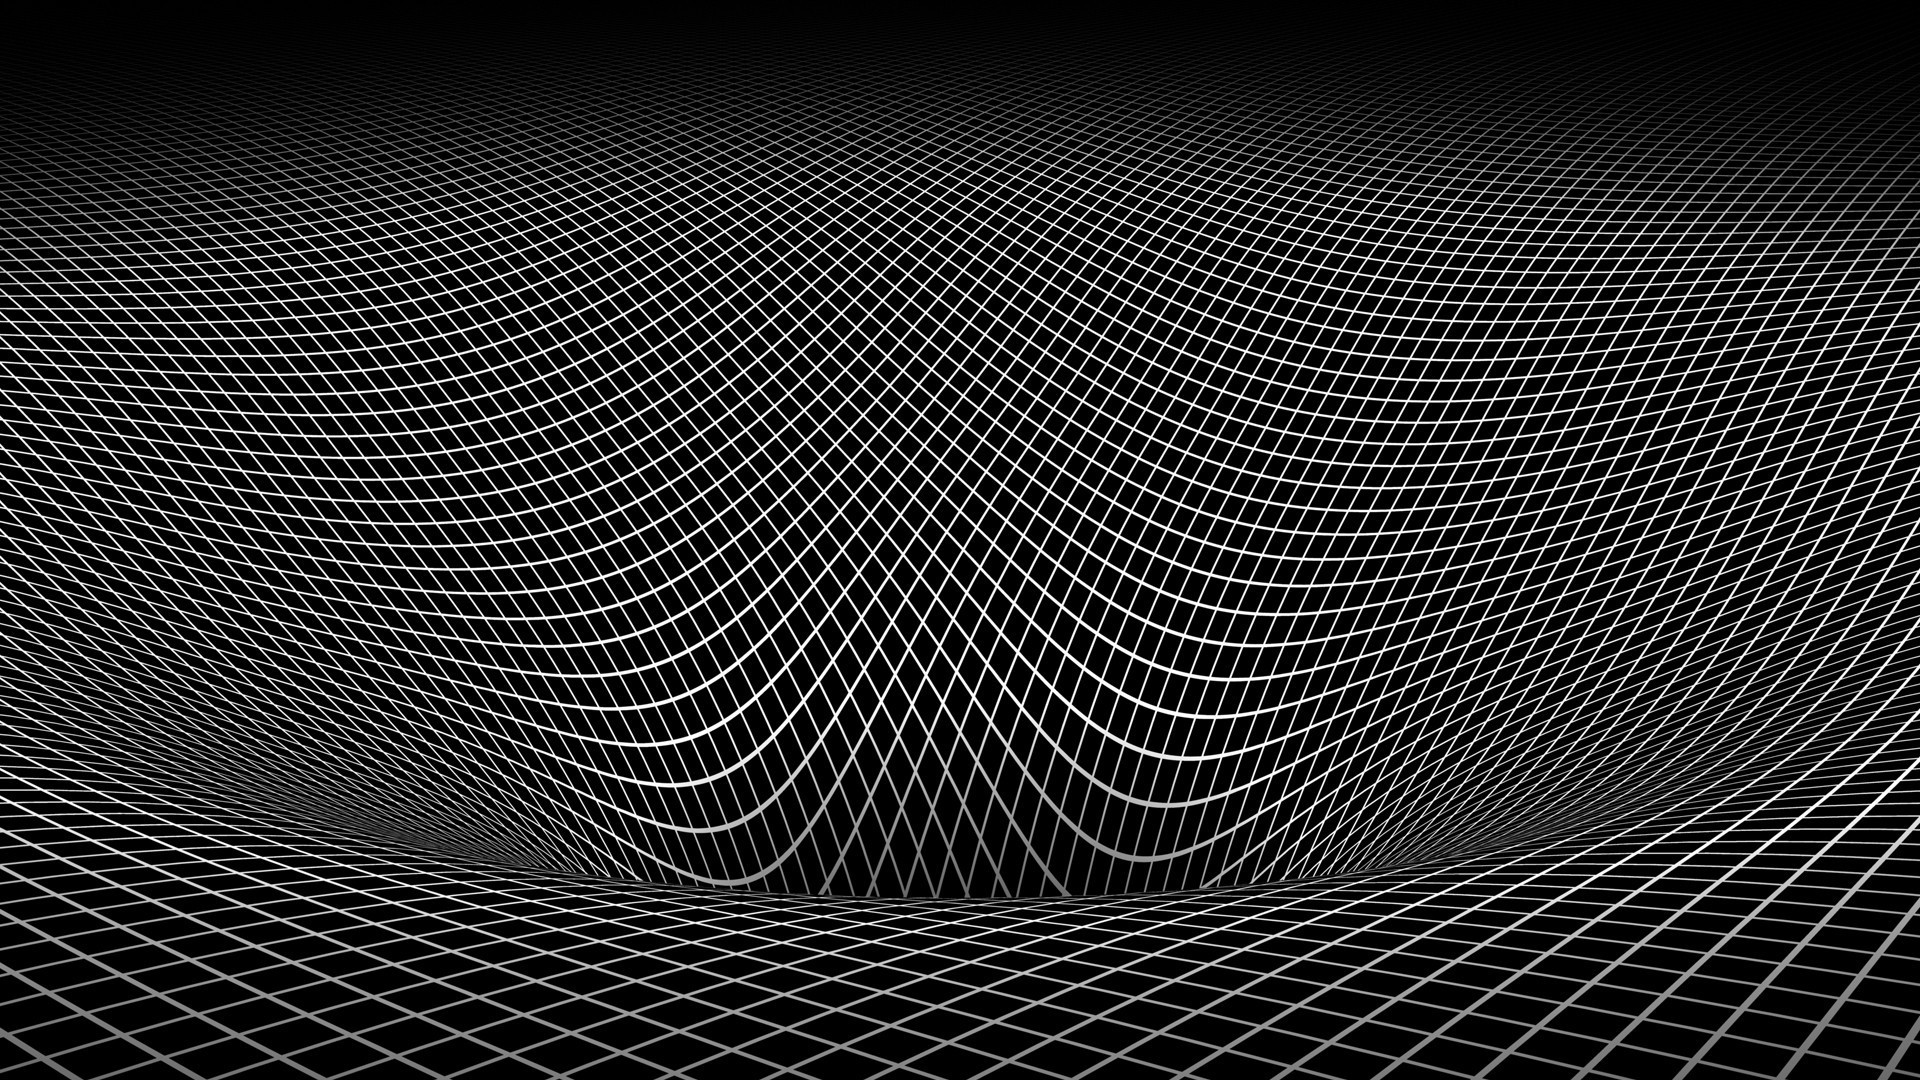 1920x1080 Abstract black and white gravity hole 3d warped wallpaper .